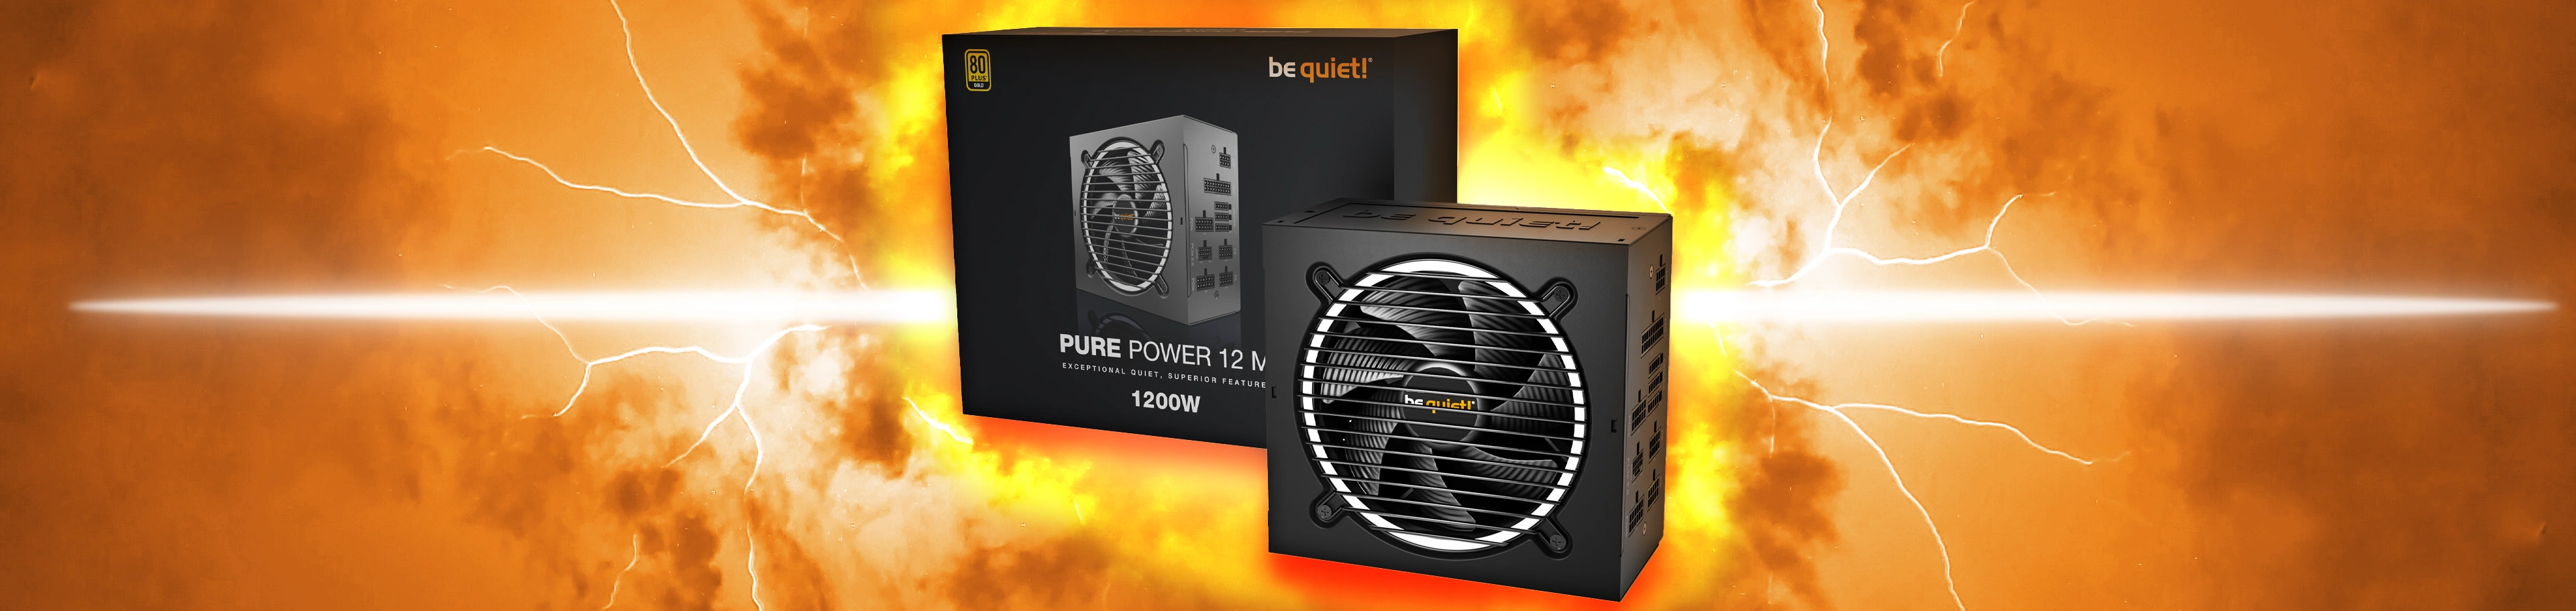 Be Quiet Pure Power 12 M 1200w